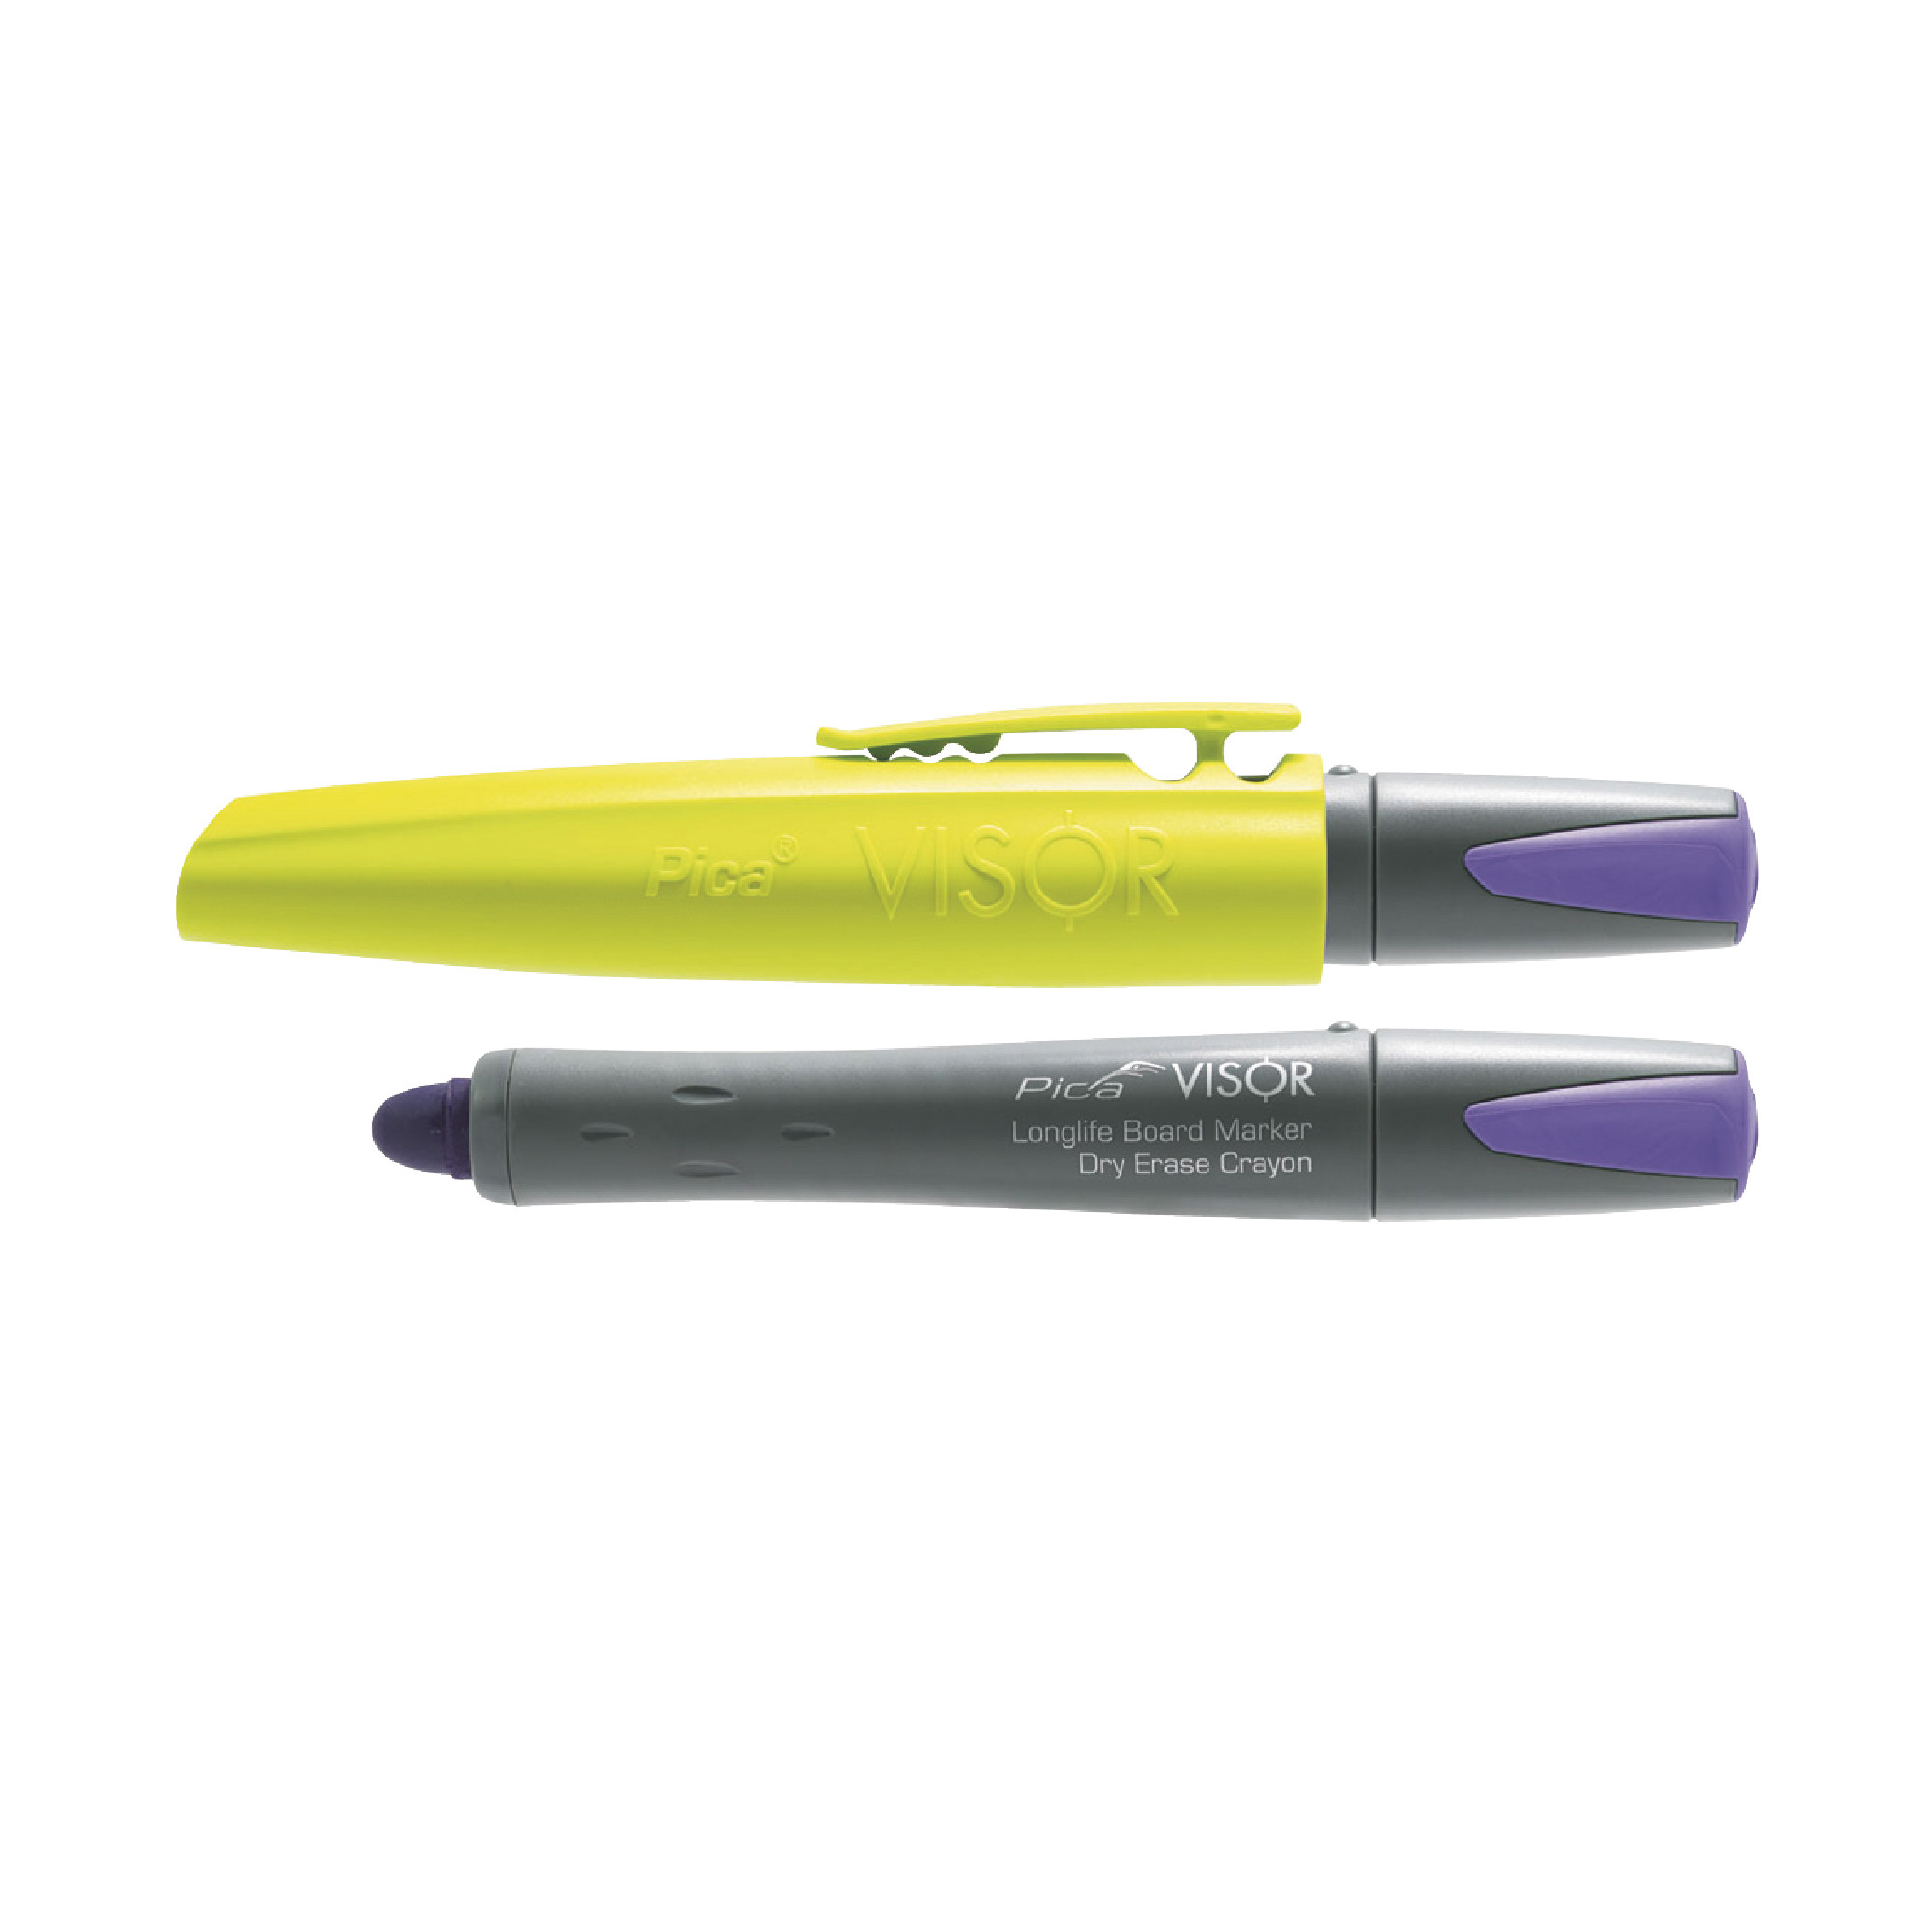 VISOR Longlife Board Marker, The Marker That Never Dries Out, Purple